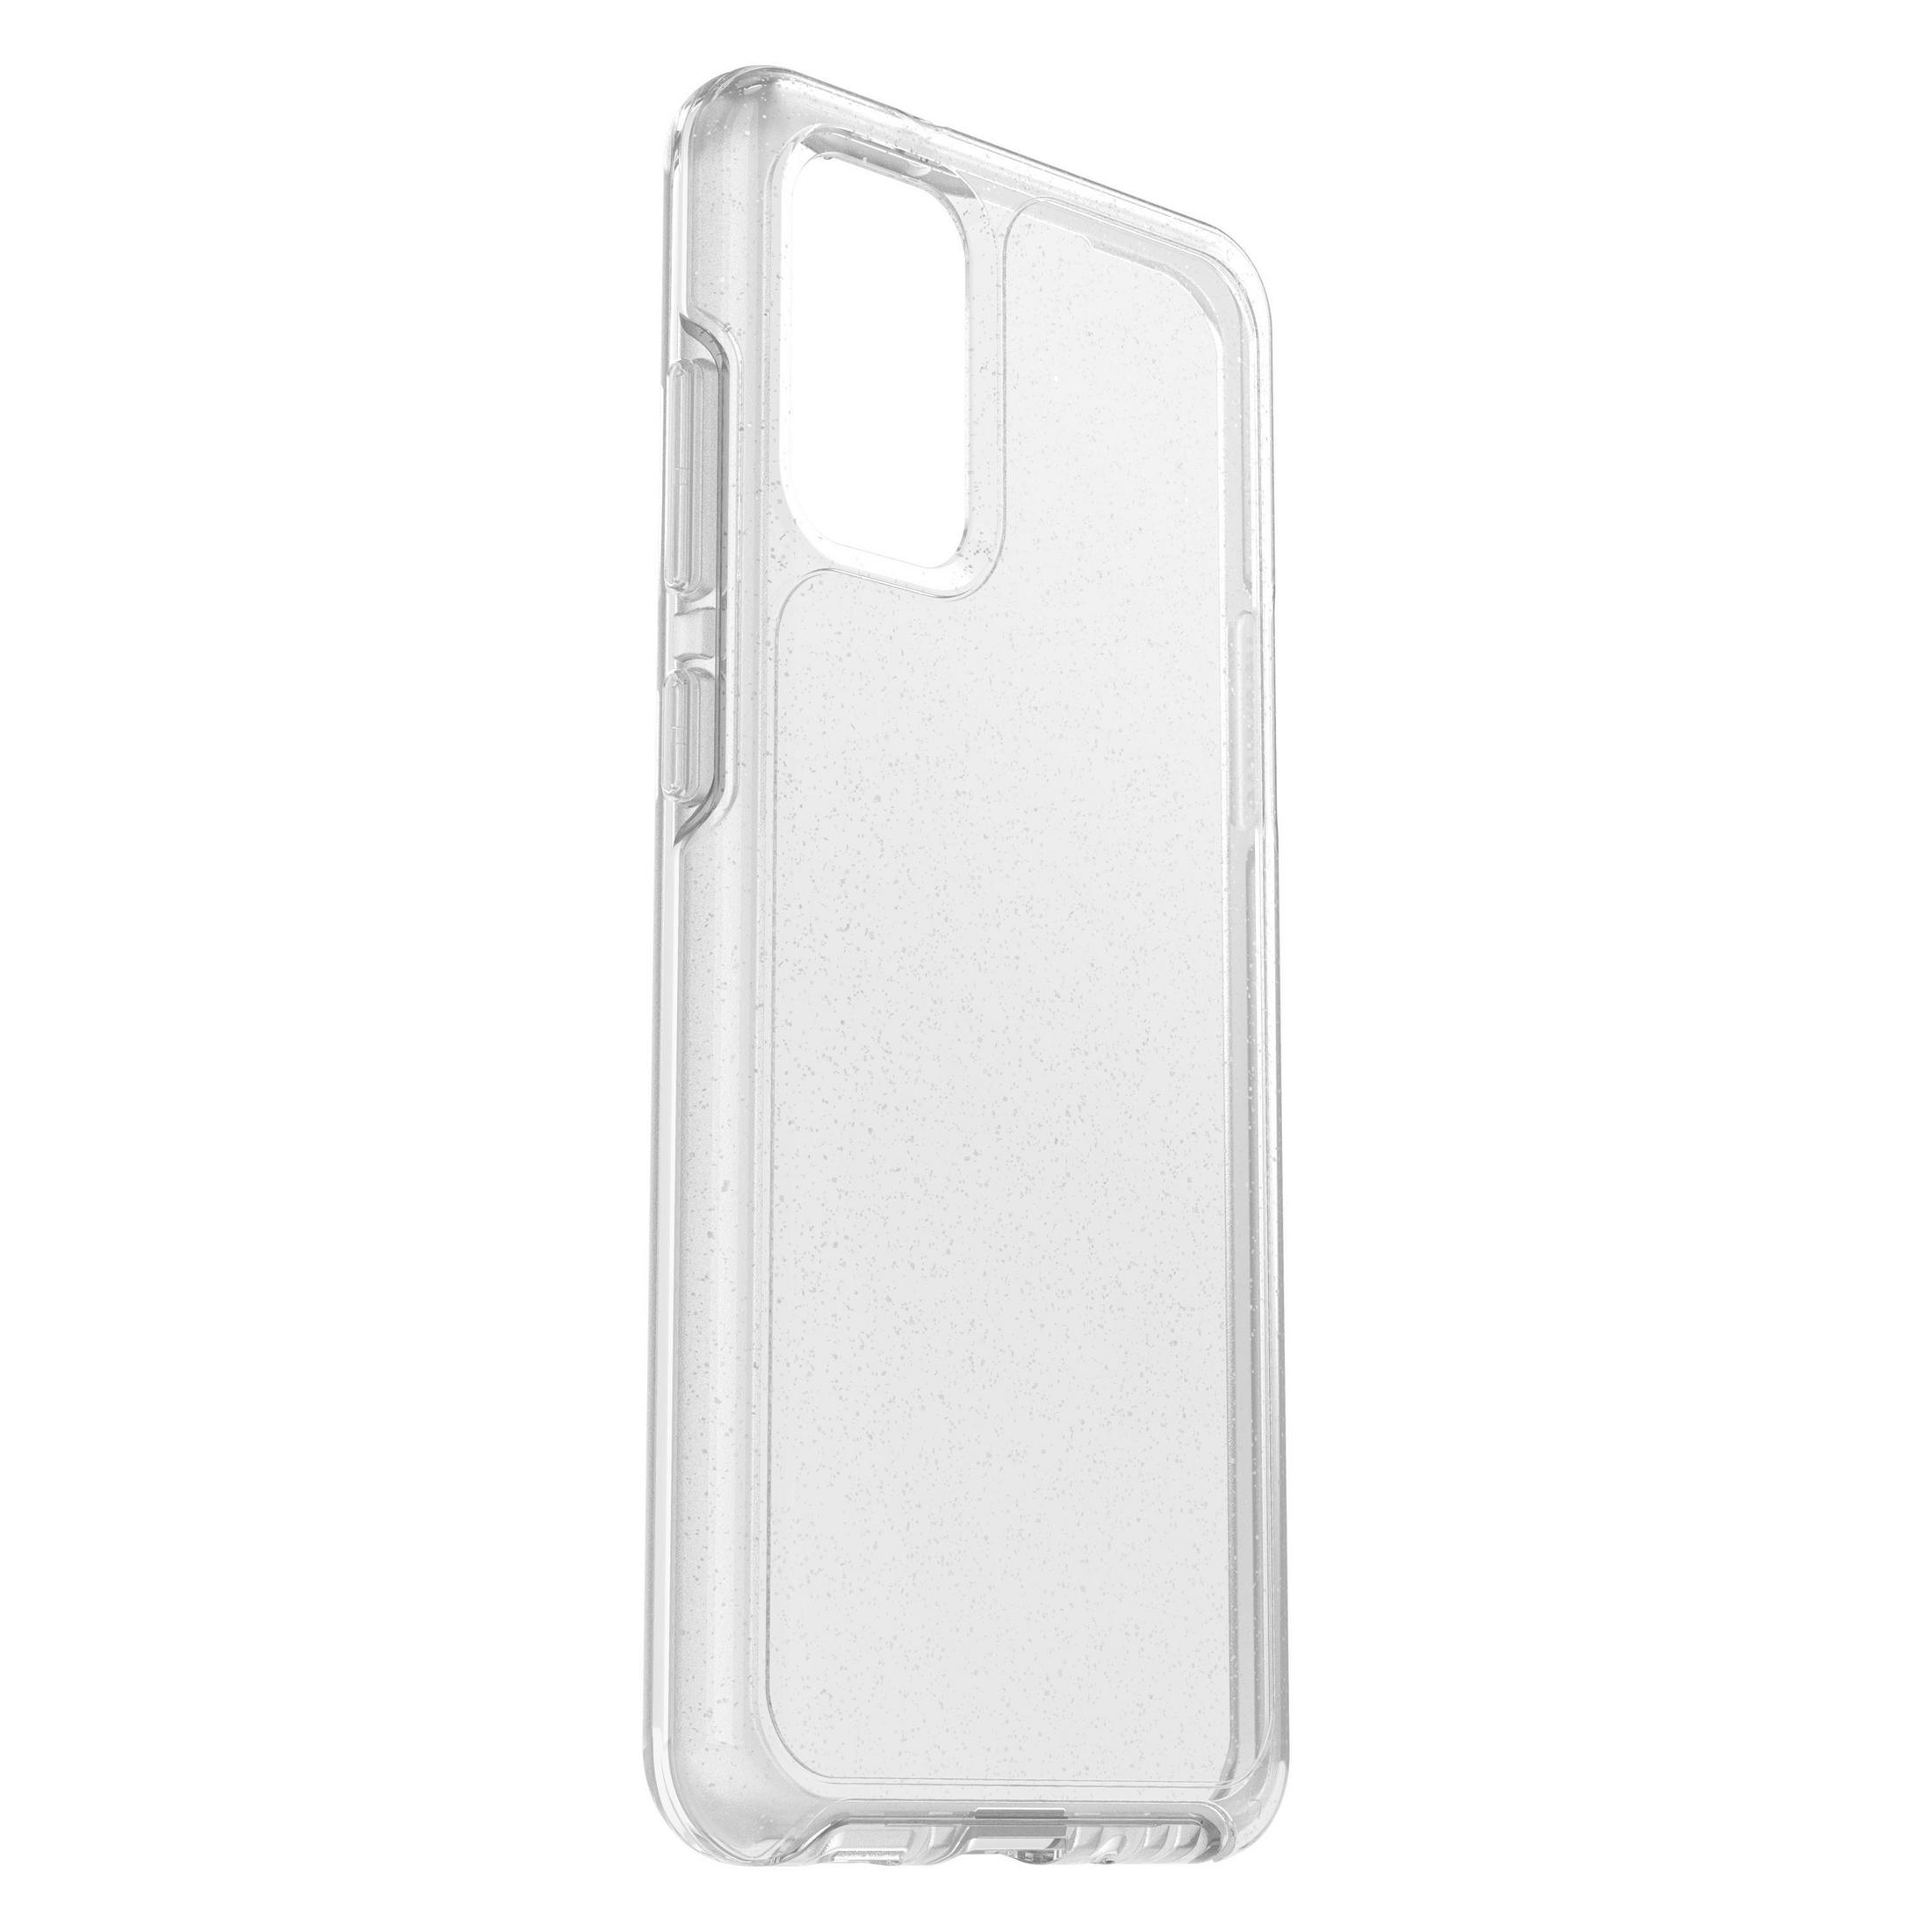 OTTERBOX 77-64282 SYMMETRY STARDUST Backcover, Galaxy CLEAR, Transparent S20+ Samsung, CLEAR S20